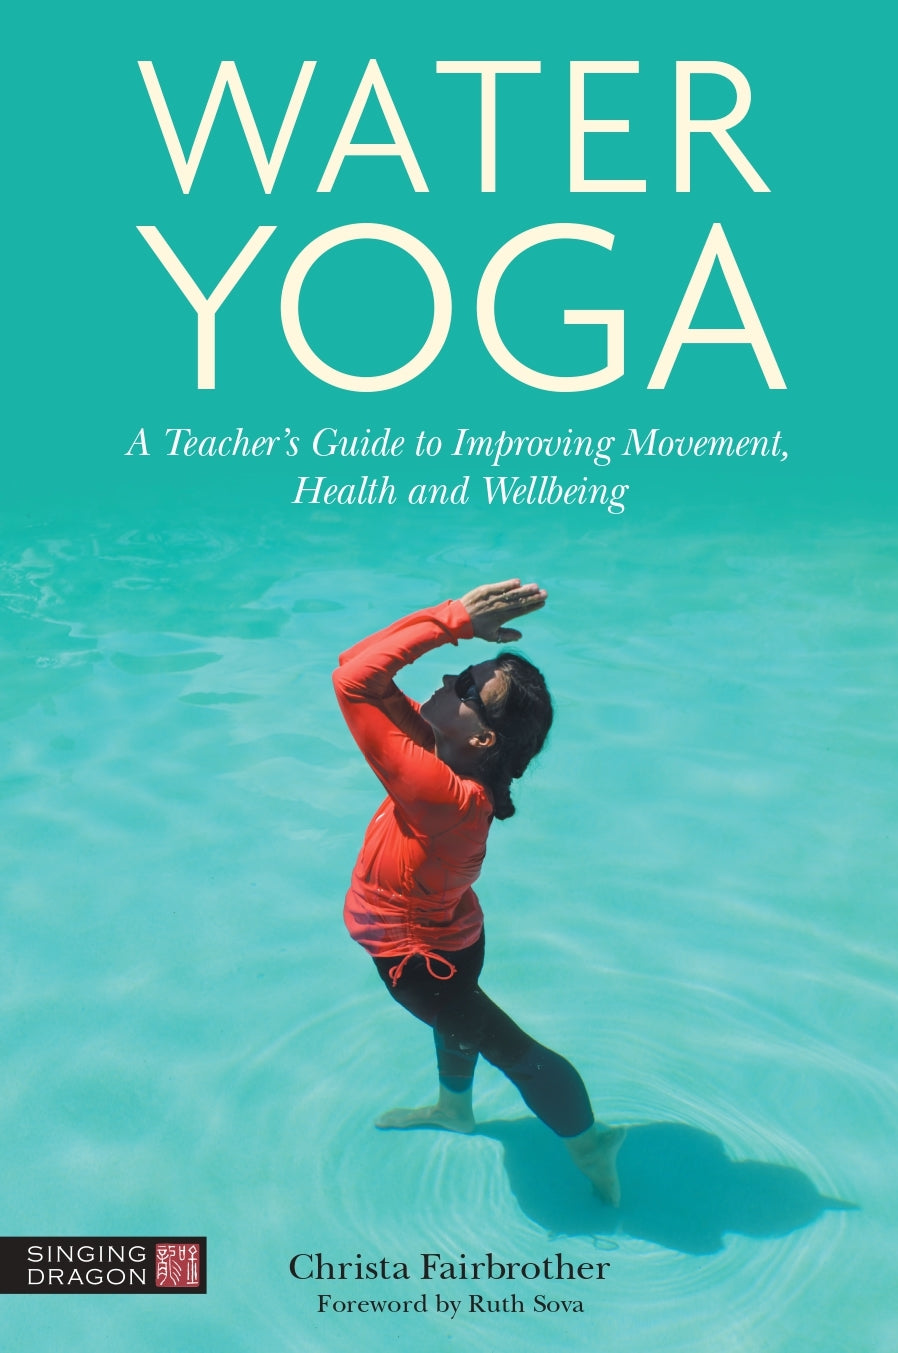 Water Yoga by Christa Fairbrother, Ruth Sova